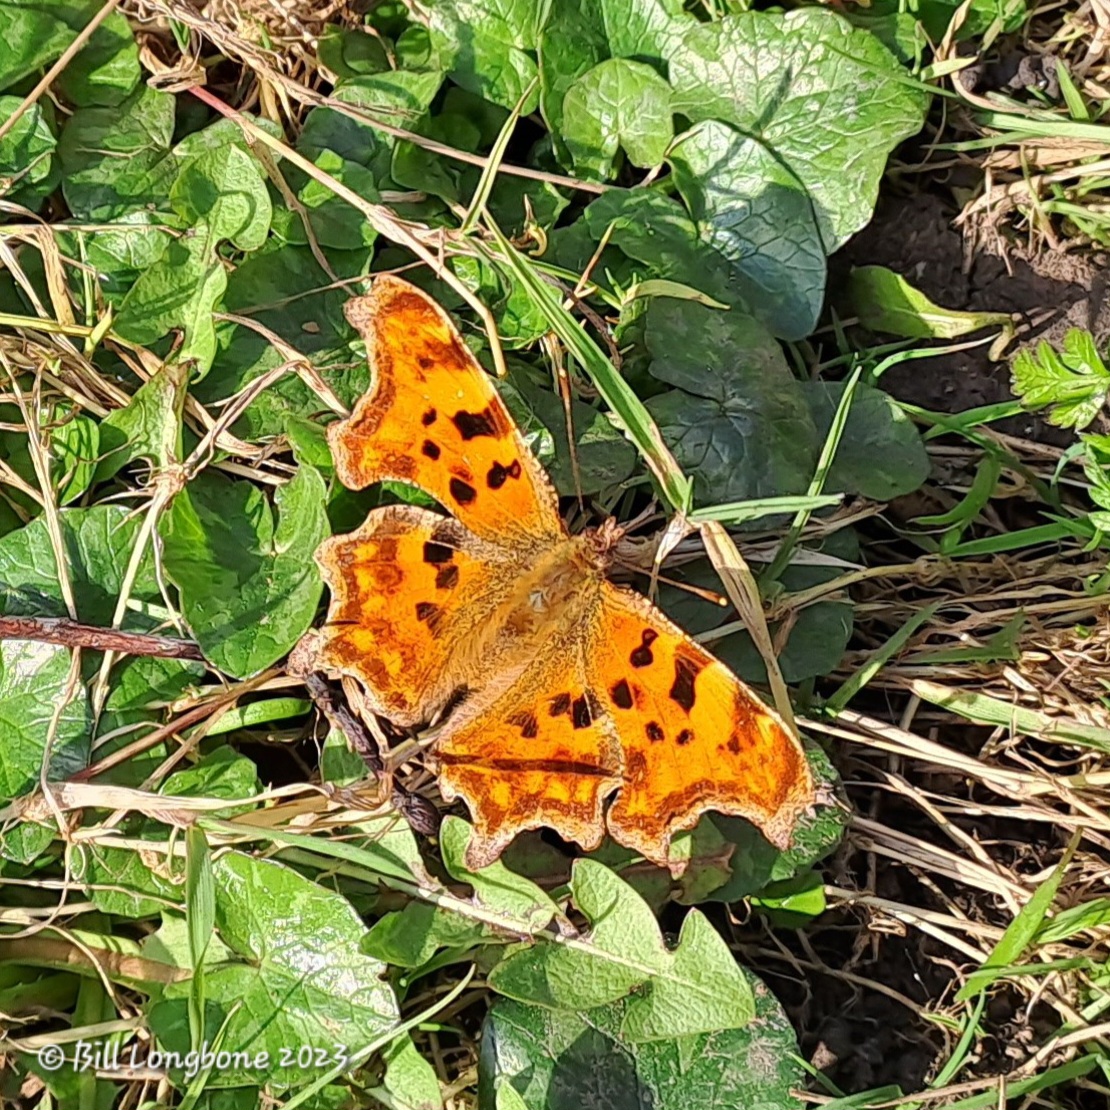 Comma Butterfly seen on the grass verge alongside the cemetery on 15 February